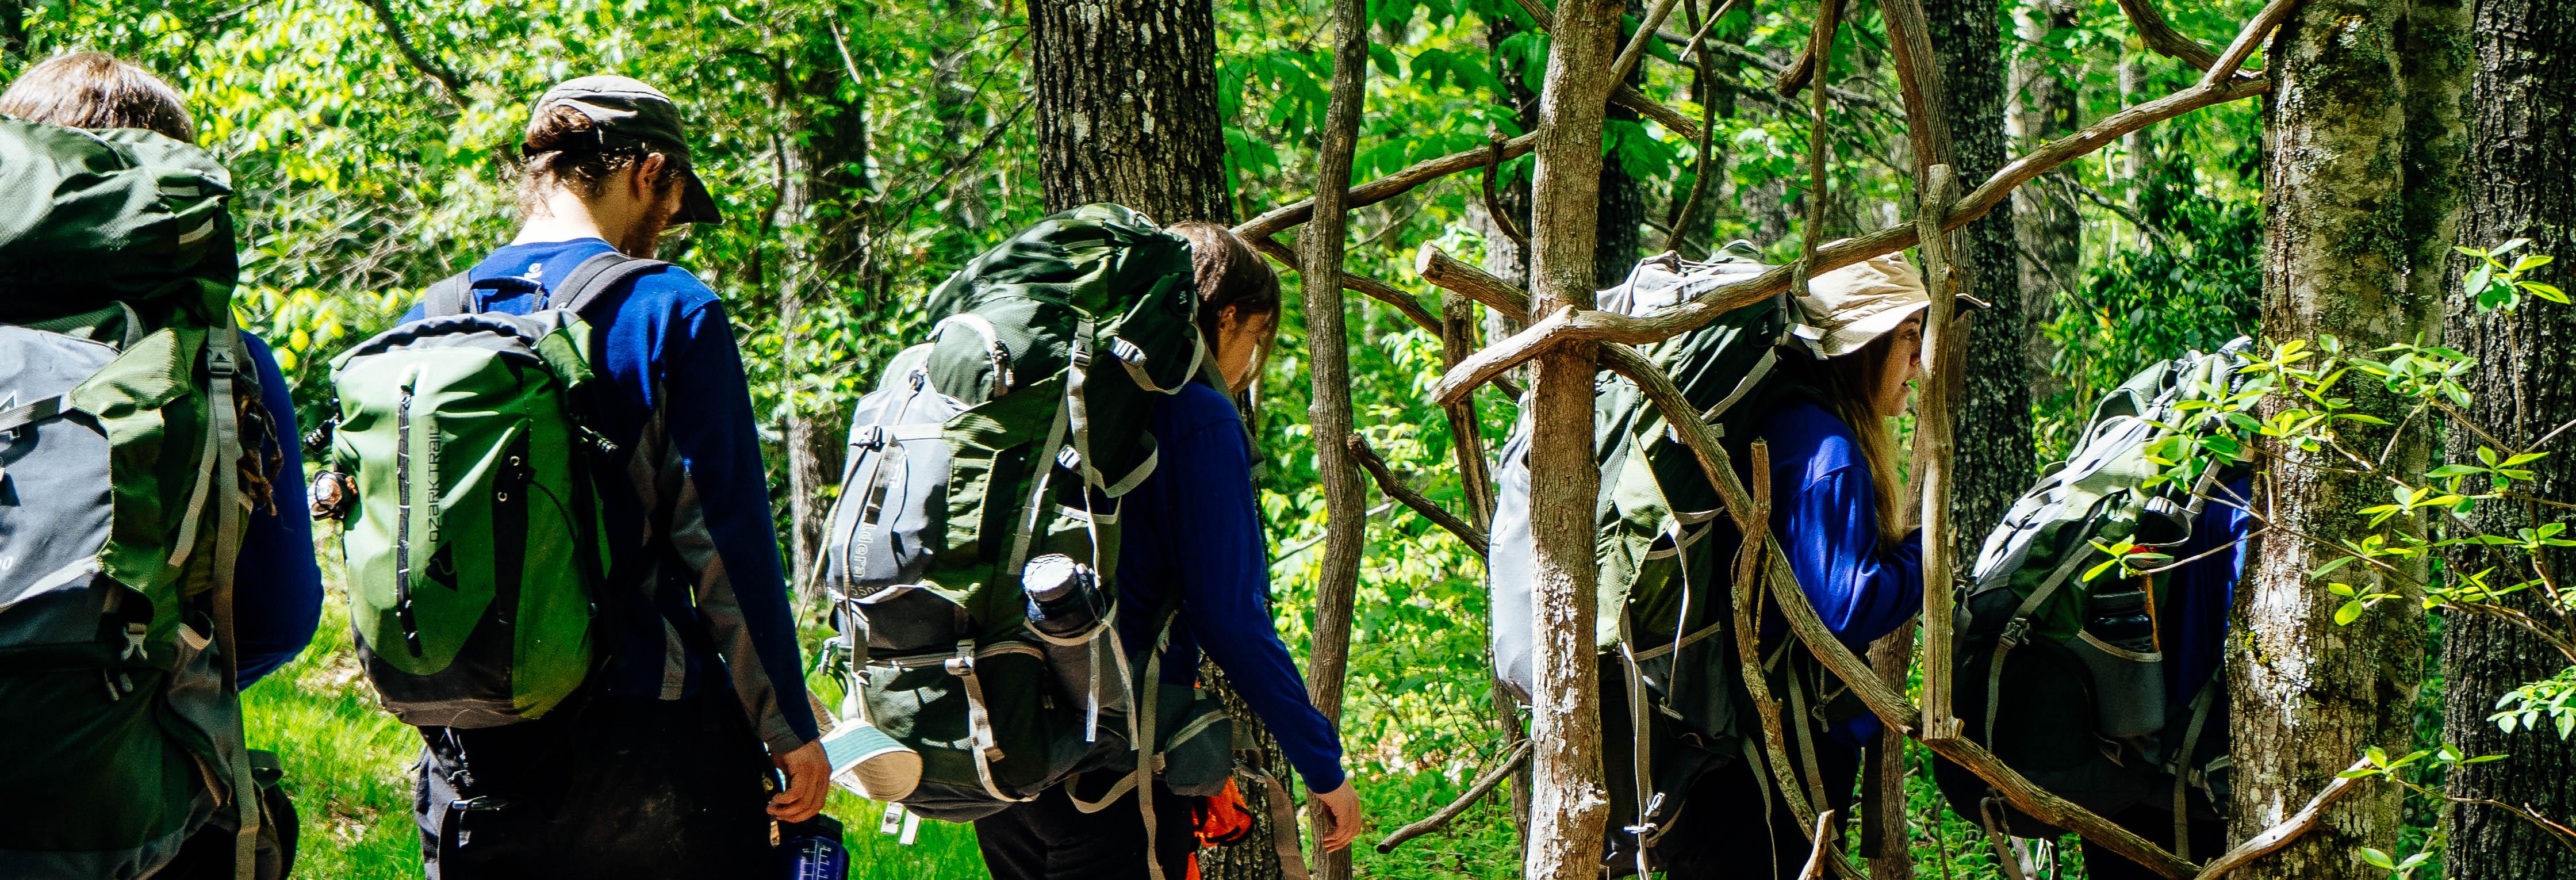 Survival Gear: The 10 Essential Items You Need To Stay Alive Outdoors 